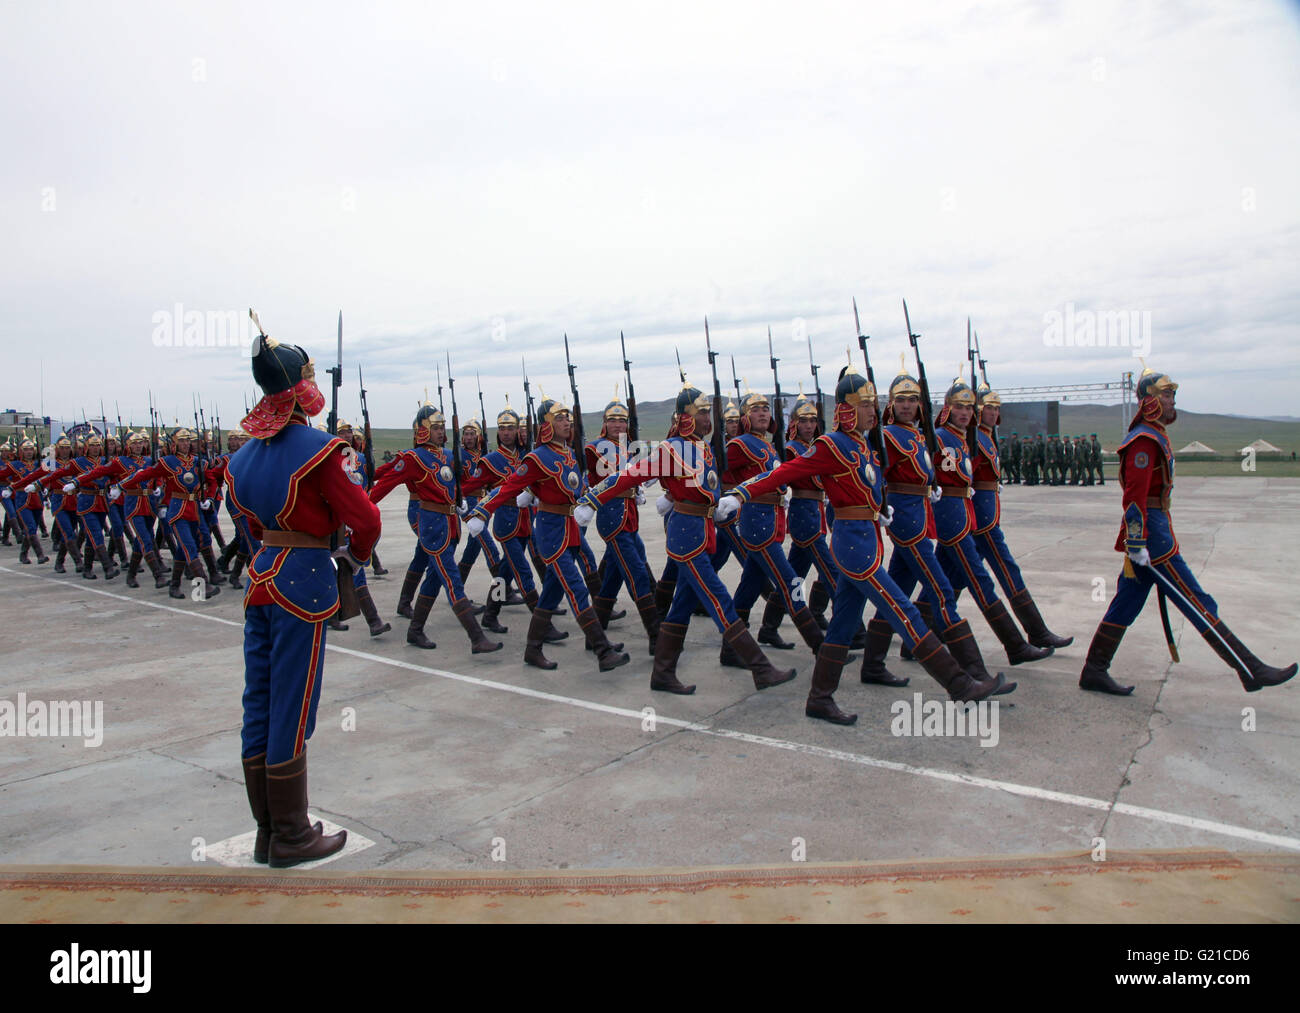 (160522) -- ULAN BATOR, May 22, 2016 (Xinhua) -- Mongolian honour guards are on a parade at the opening ceremony of the Khan Quest 2016 peacekeeping military drill in Tavan Tolgoi, Mongolia, May 22, 2016. Mongolia. Mongolia kicked off its annual multinational peacekeeping drill on Sunday, with an eye to boosting military-to-military interoperability on peacekeeping missions. Military personnel from 47 countries in five continents have arrived in Tavan Tolgoi, a Mongolian military training ground about 65 kilometers away from Ulan Bator, capital of Mongolia, for the military exercise code-named Stock Photo